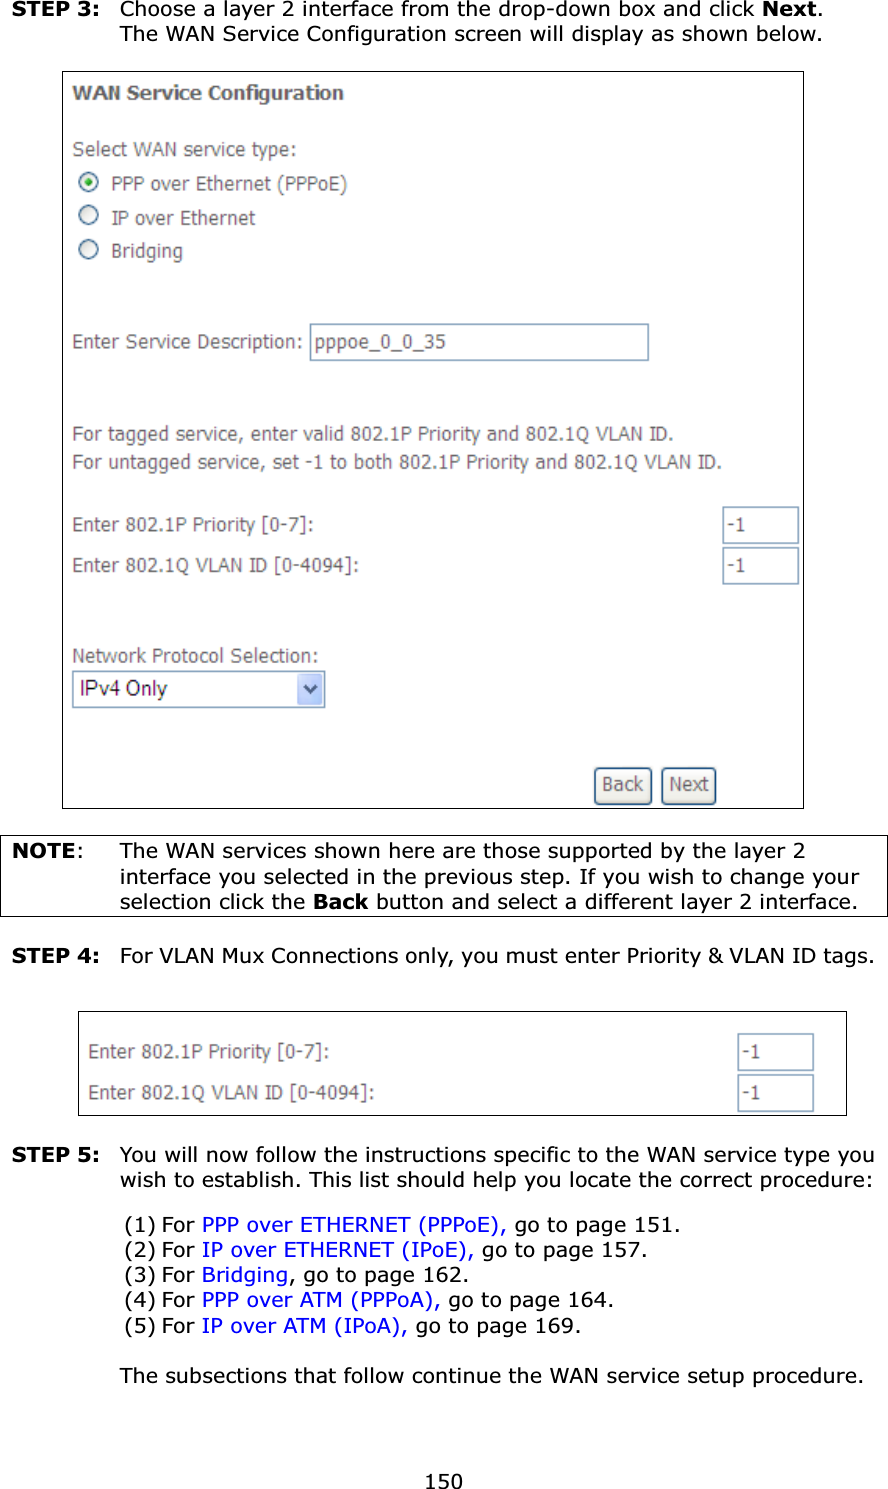 150STEP 3: Choose a layer 2 interface from the drop-down box and click Next. The WAN Service Configuration screen will display as shown below.NOTE: The WAN services shown here are those supported by the layer 2 interface you selected in the previous step. If you wish to change yourselection click the Back button and select a different layer 2 interface.STEP 4: For VLAN Mux Connections only, you must enter Priority &amp; VLAN ID tags.STEP 5: You will now follow the instructions specific to the WAN service type you wish to establish. This list should help you locate the correct procedure:(1) For PPP over ETHERNET (PPPoE), go to page 151.(2) For IP over ETHERNET (IPoE), go to page 157.(3) For Bridging, go to page 162.(4) For PPP over ATM (PPPoA), go to page 164.(5) For IP over ATM (IPoA), go to page 169.The subsections that follow continue the WAN service setup procedure.   